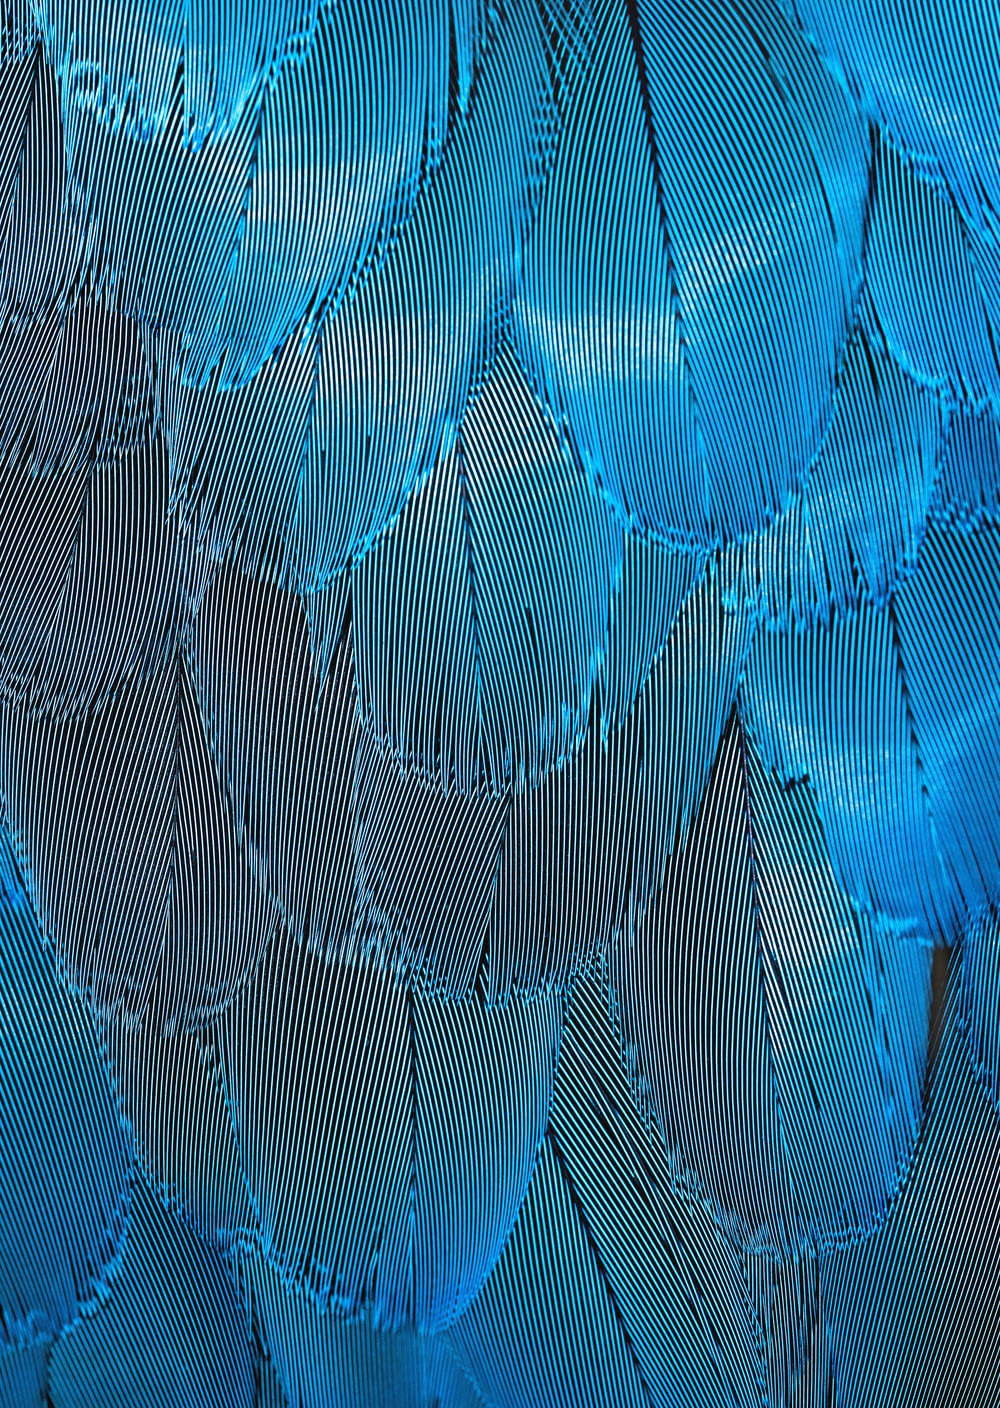 blue and brown feathers